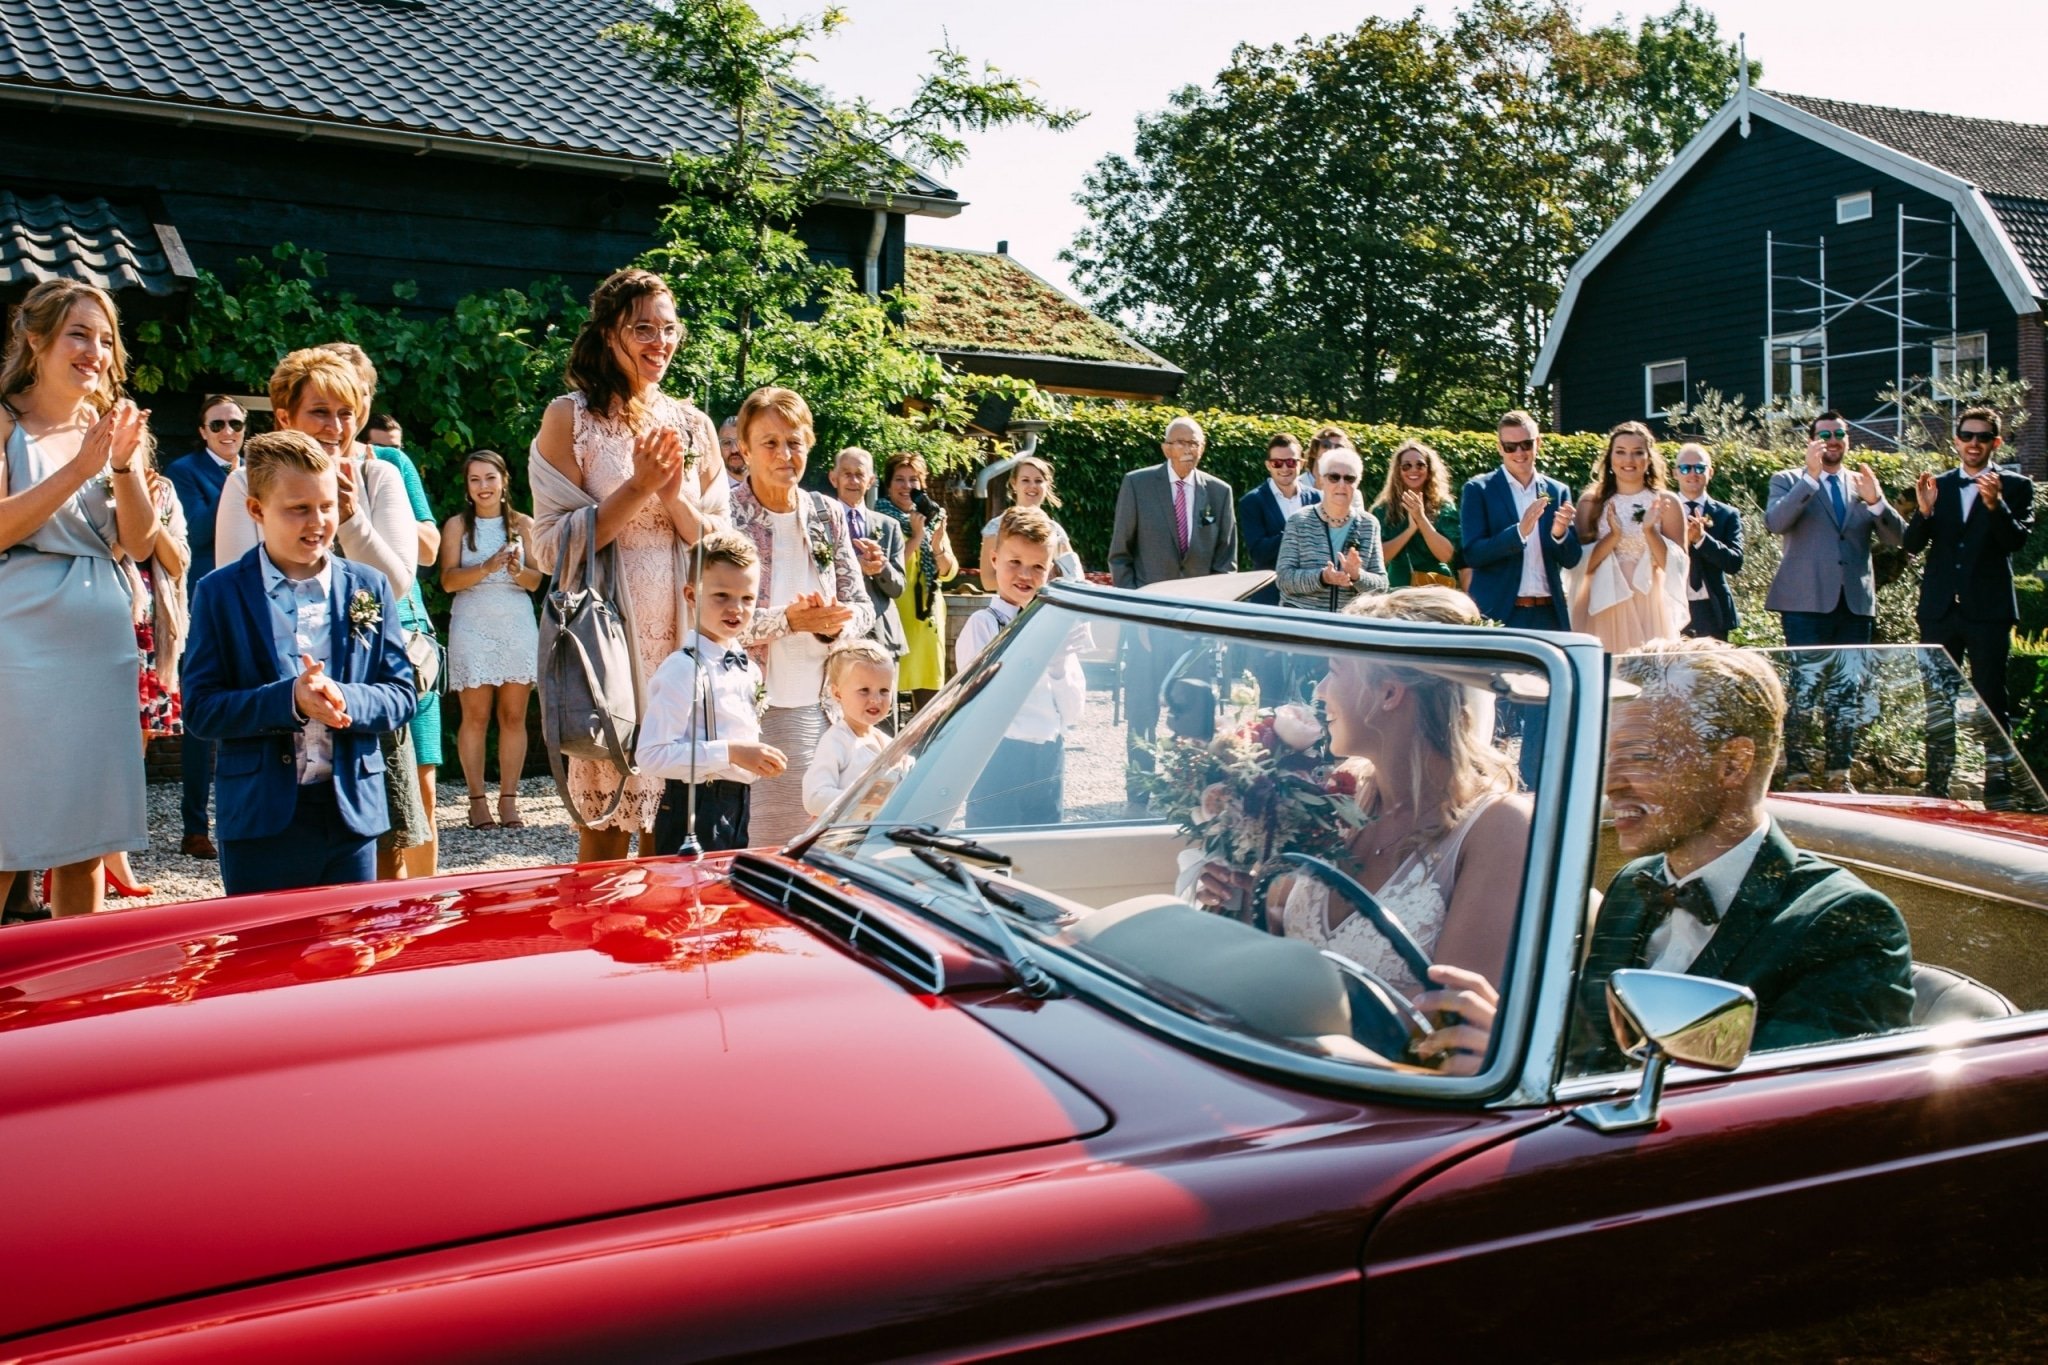 A bride and groom in a red convertible wedding car.